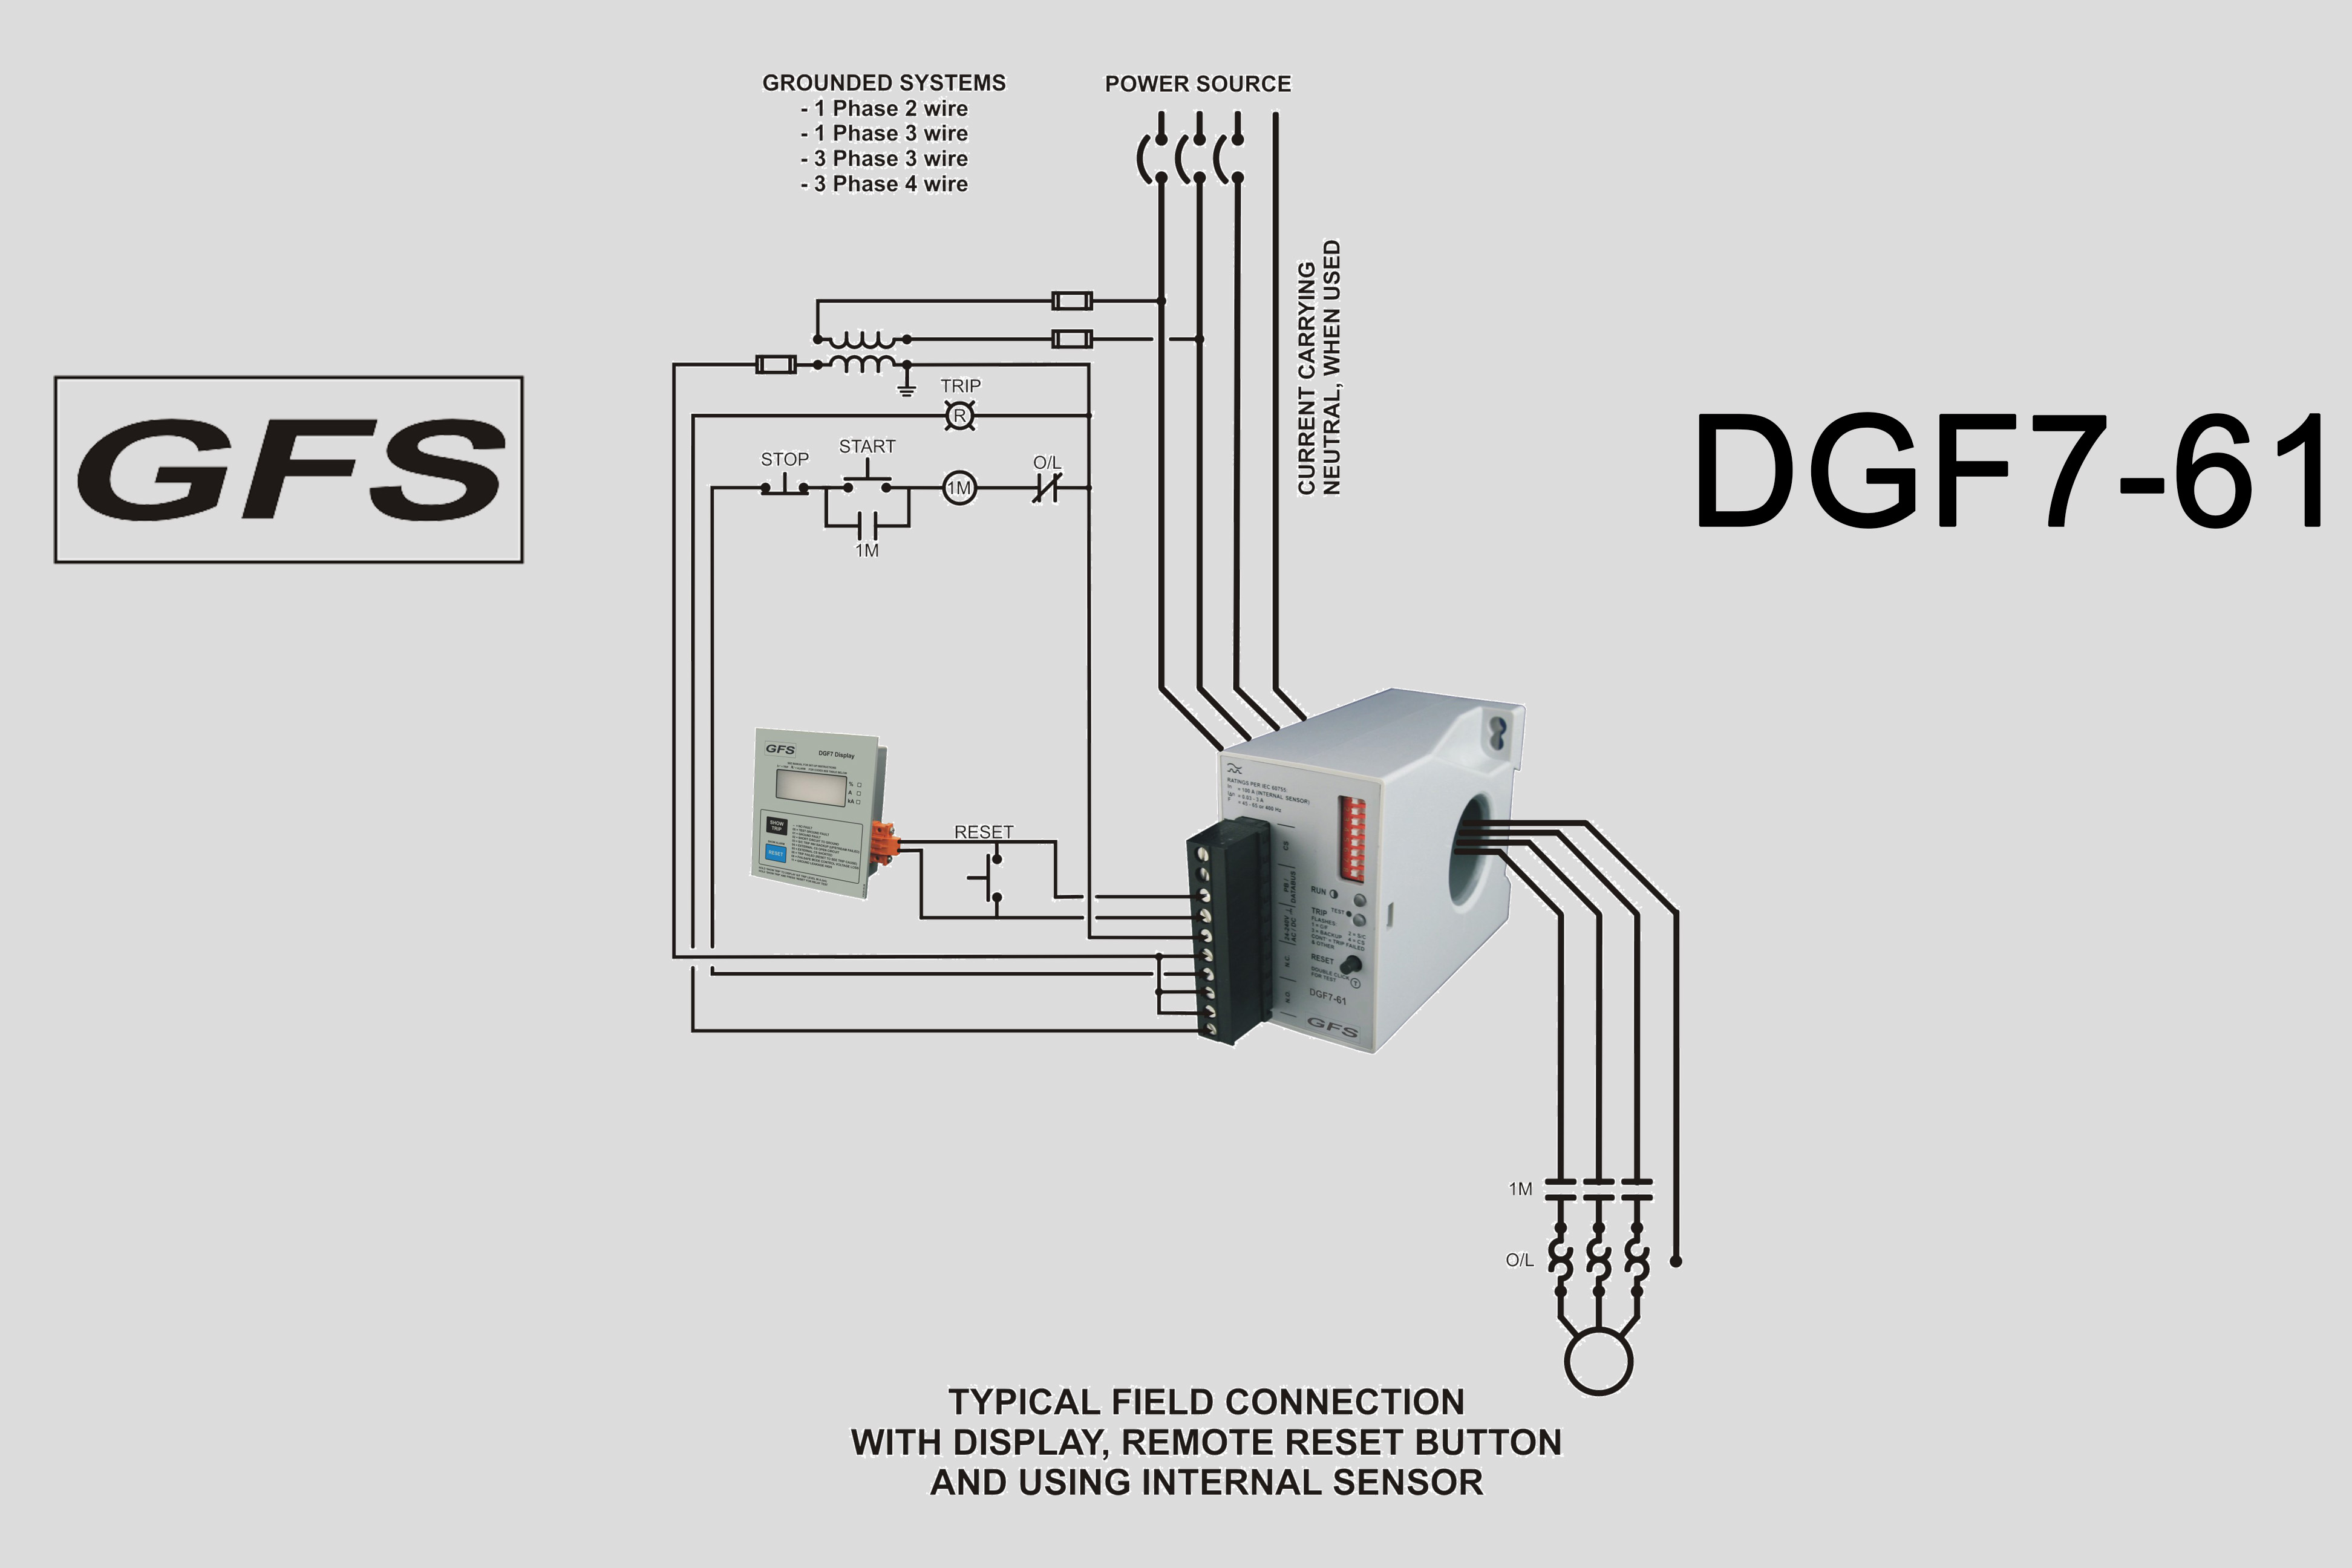 Ground Fault Relay DGF7-61 typical field connection using internal sensor